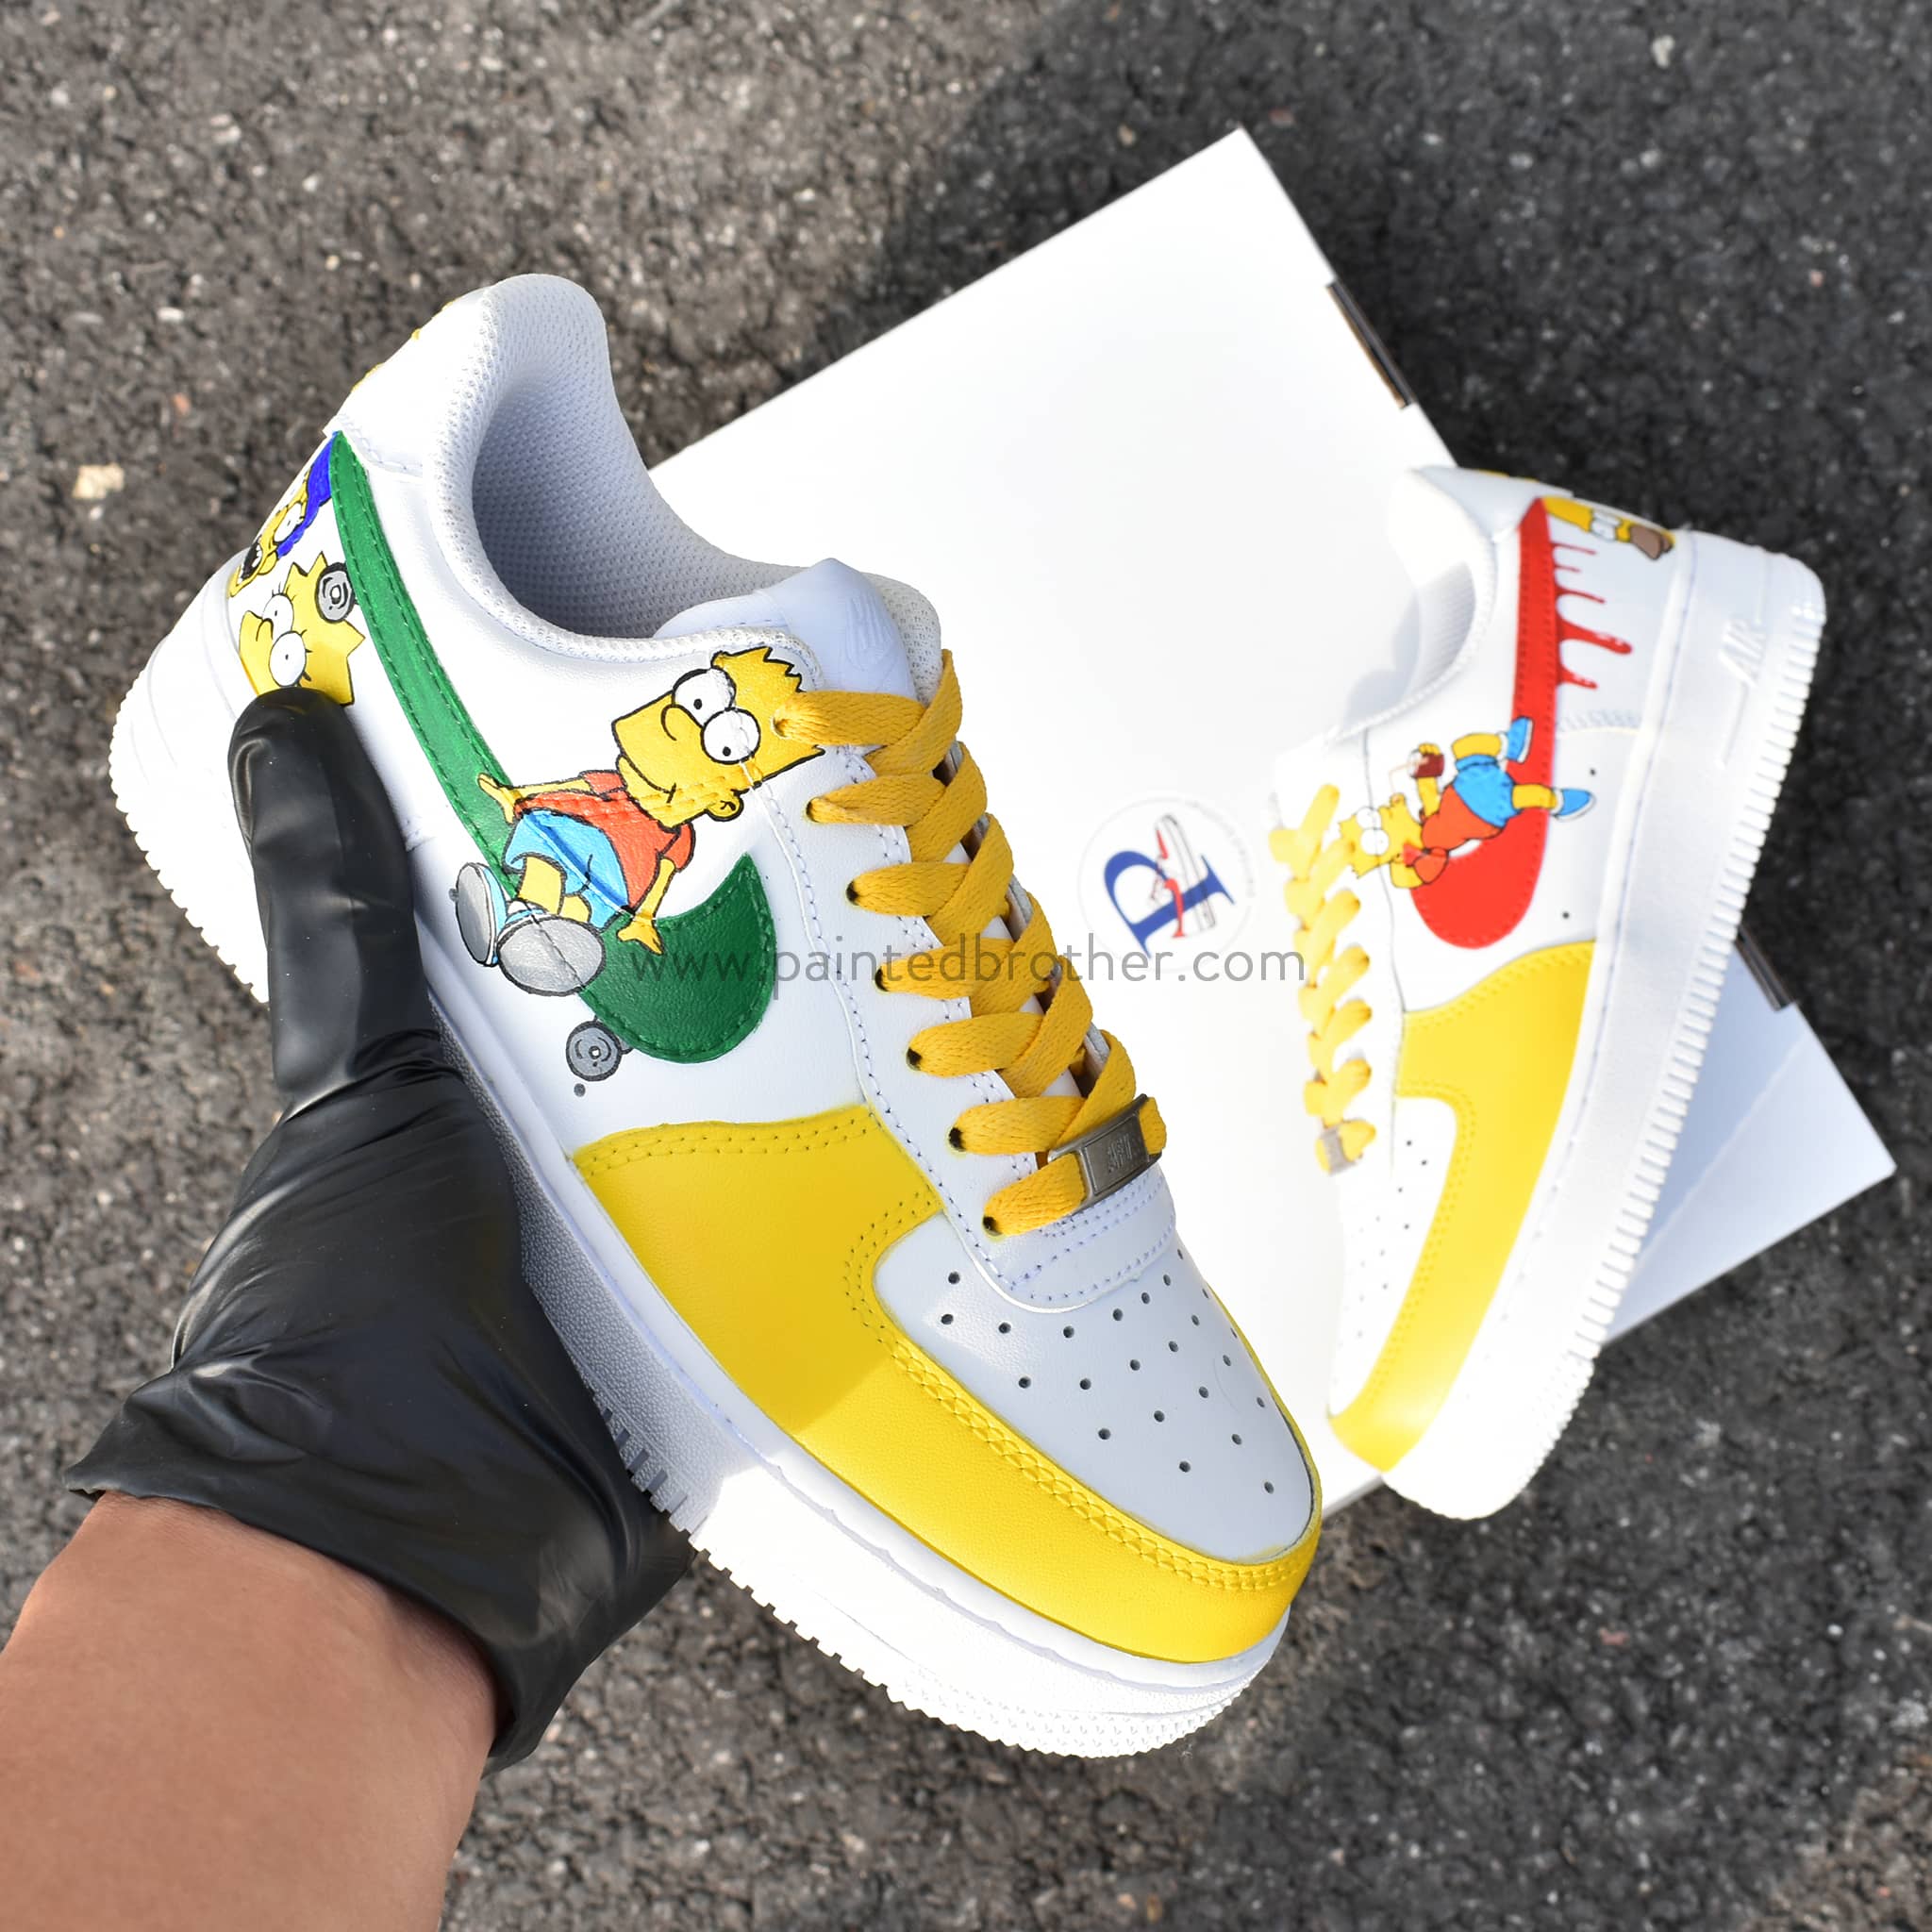 Custom Hand Painted The Simpsons Nike Air Force 1-paintedbrother